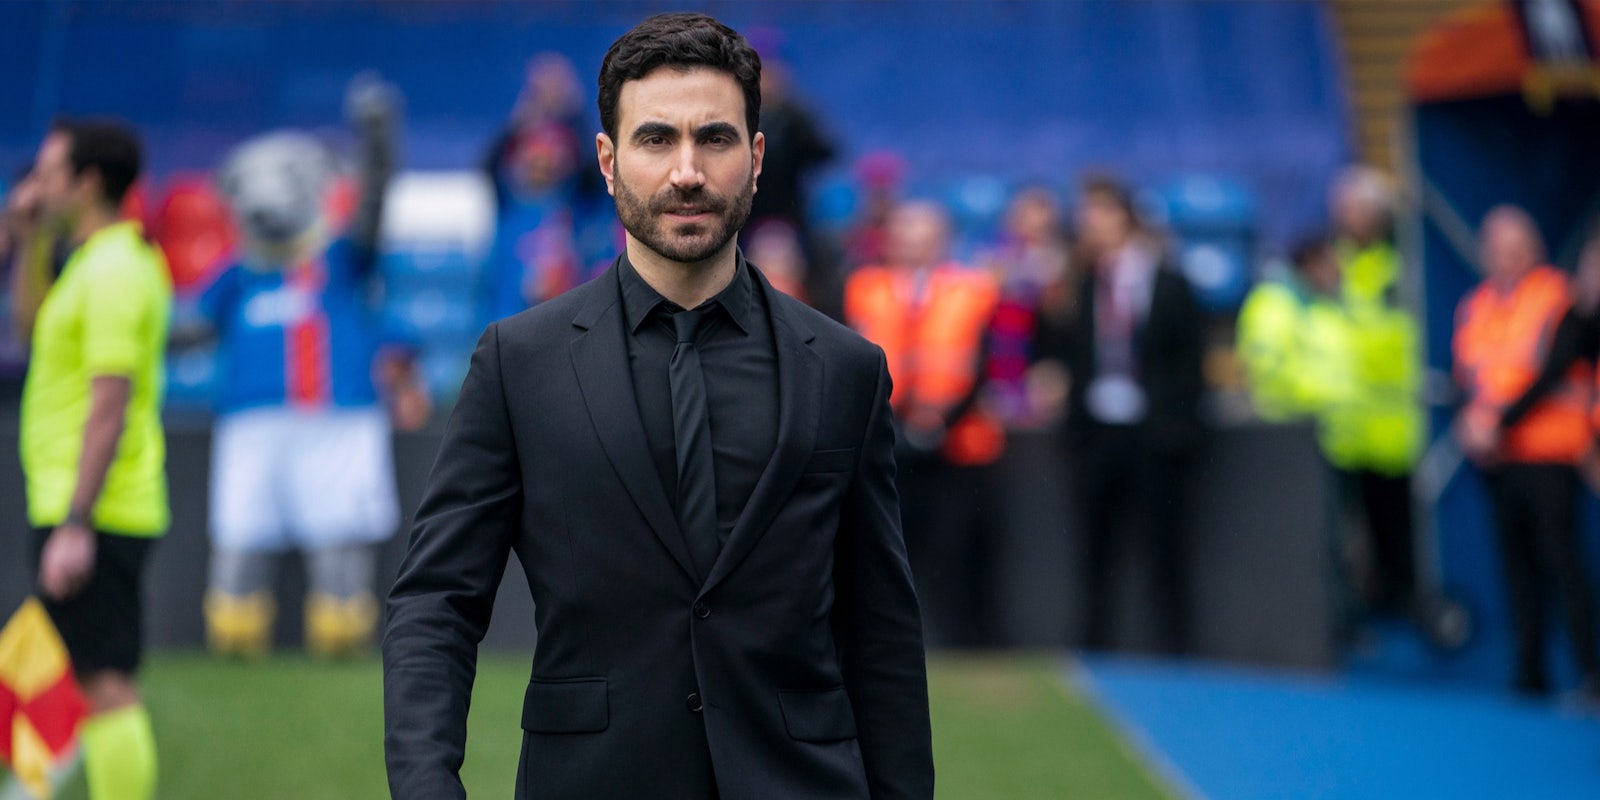 man in black suit walking on to a soccer pitch